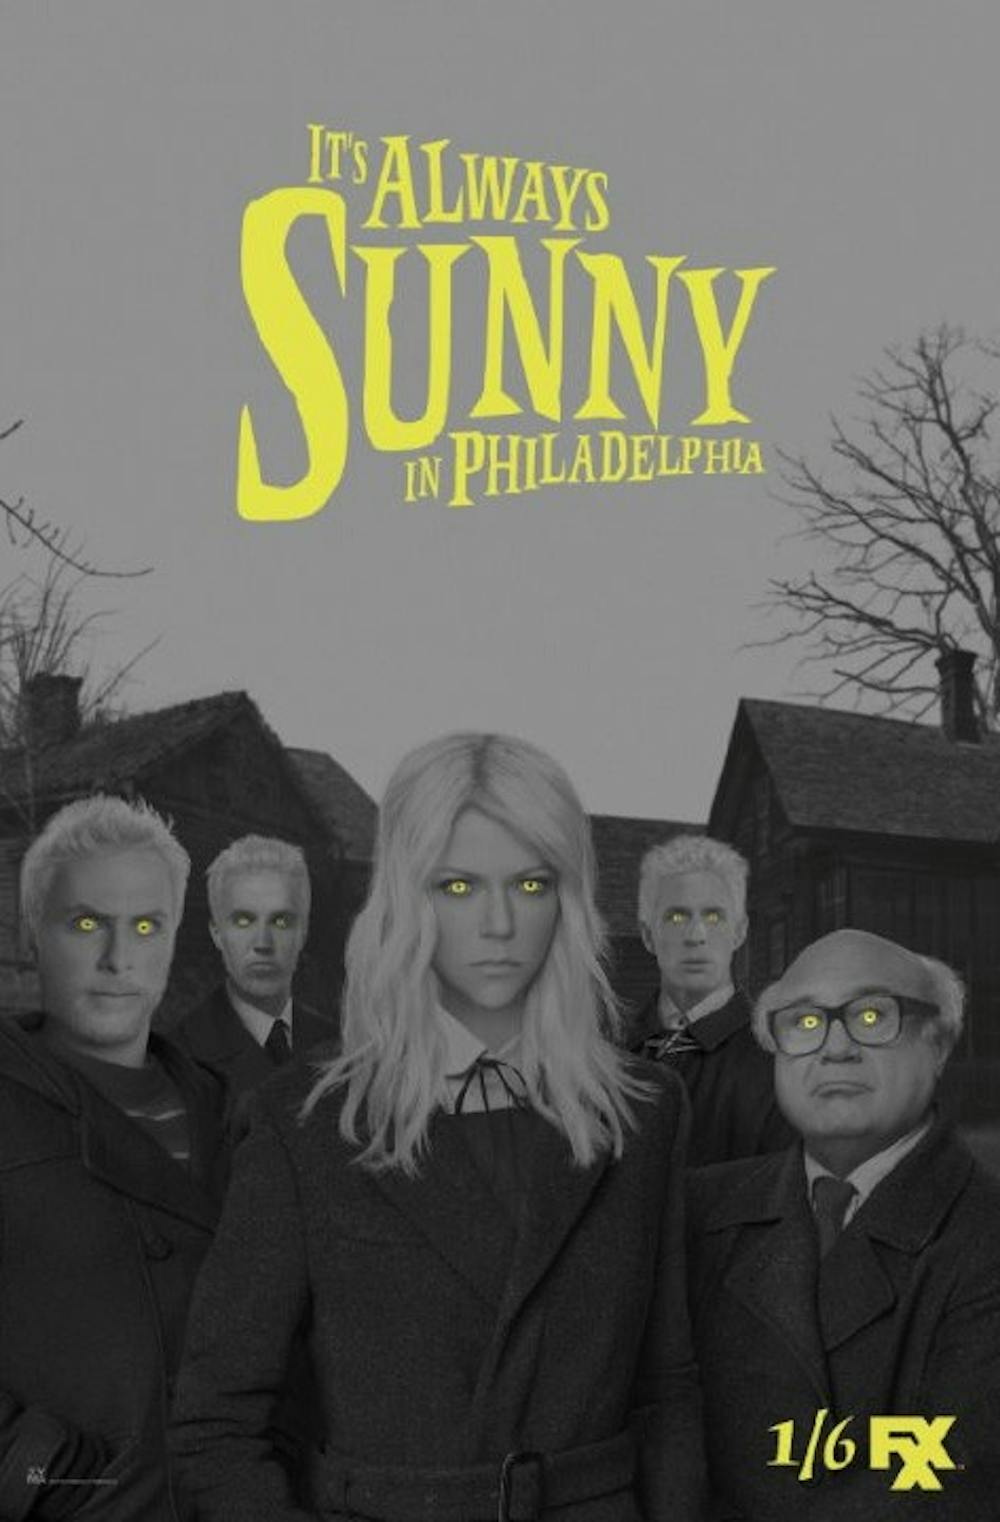 <p>The latest episode of "It's Always Sunny" disappoints.</p>